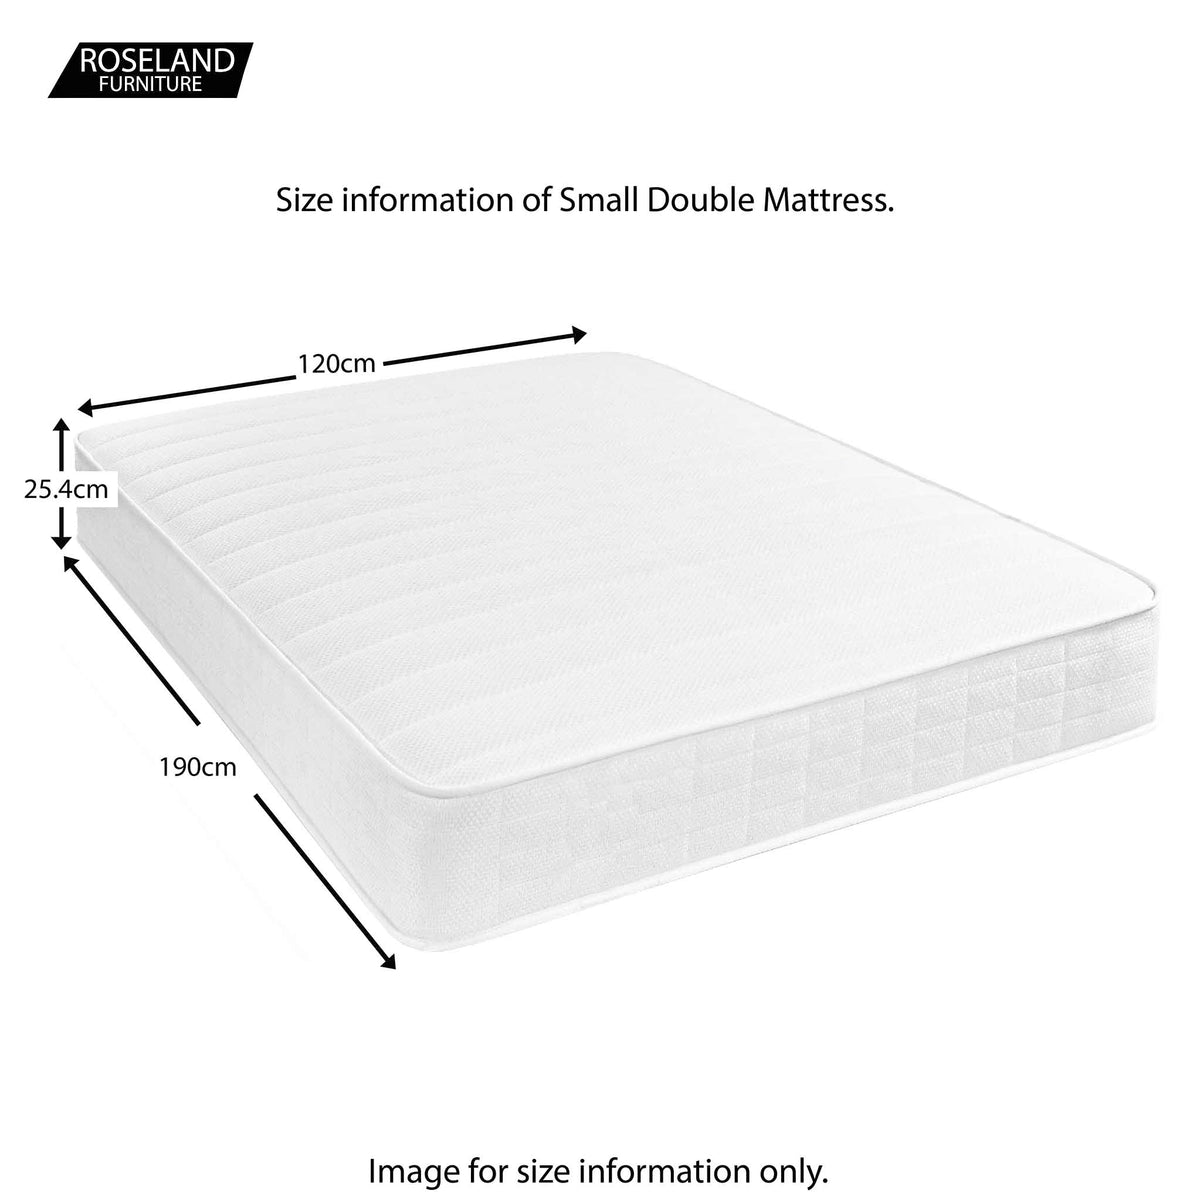 Roseland Sleep Onyx - Small Double Size Guide